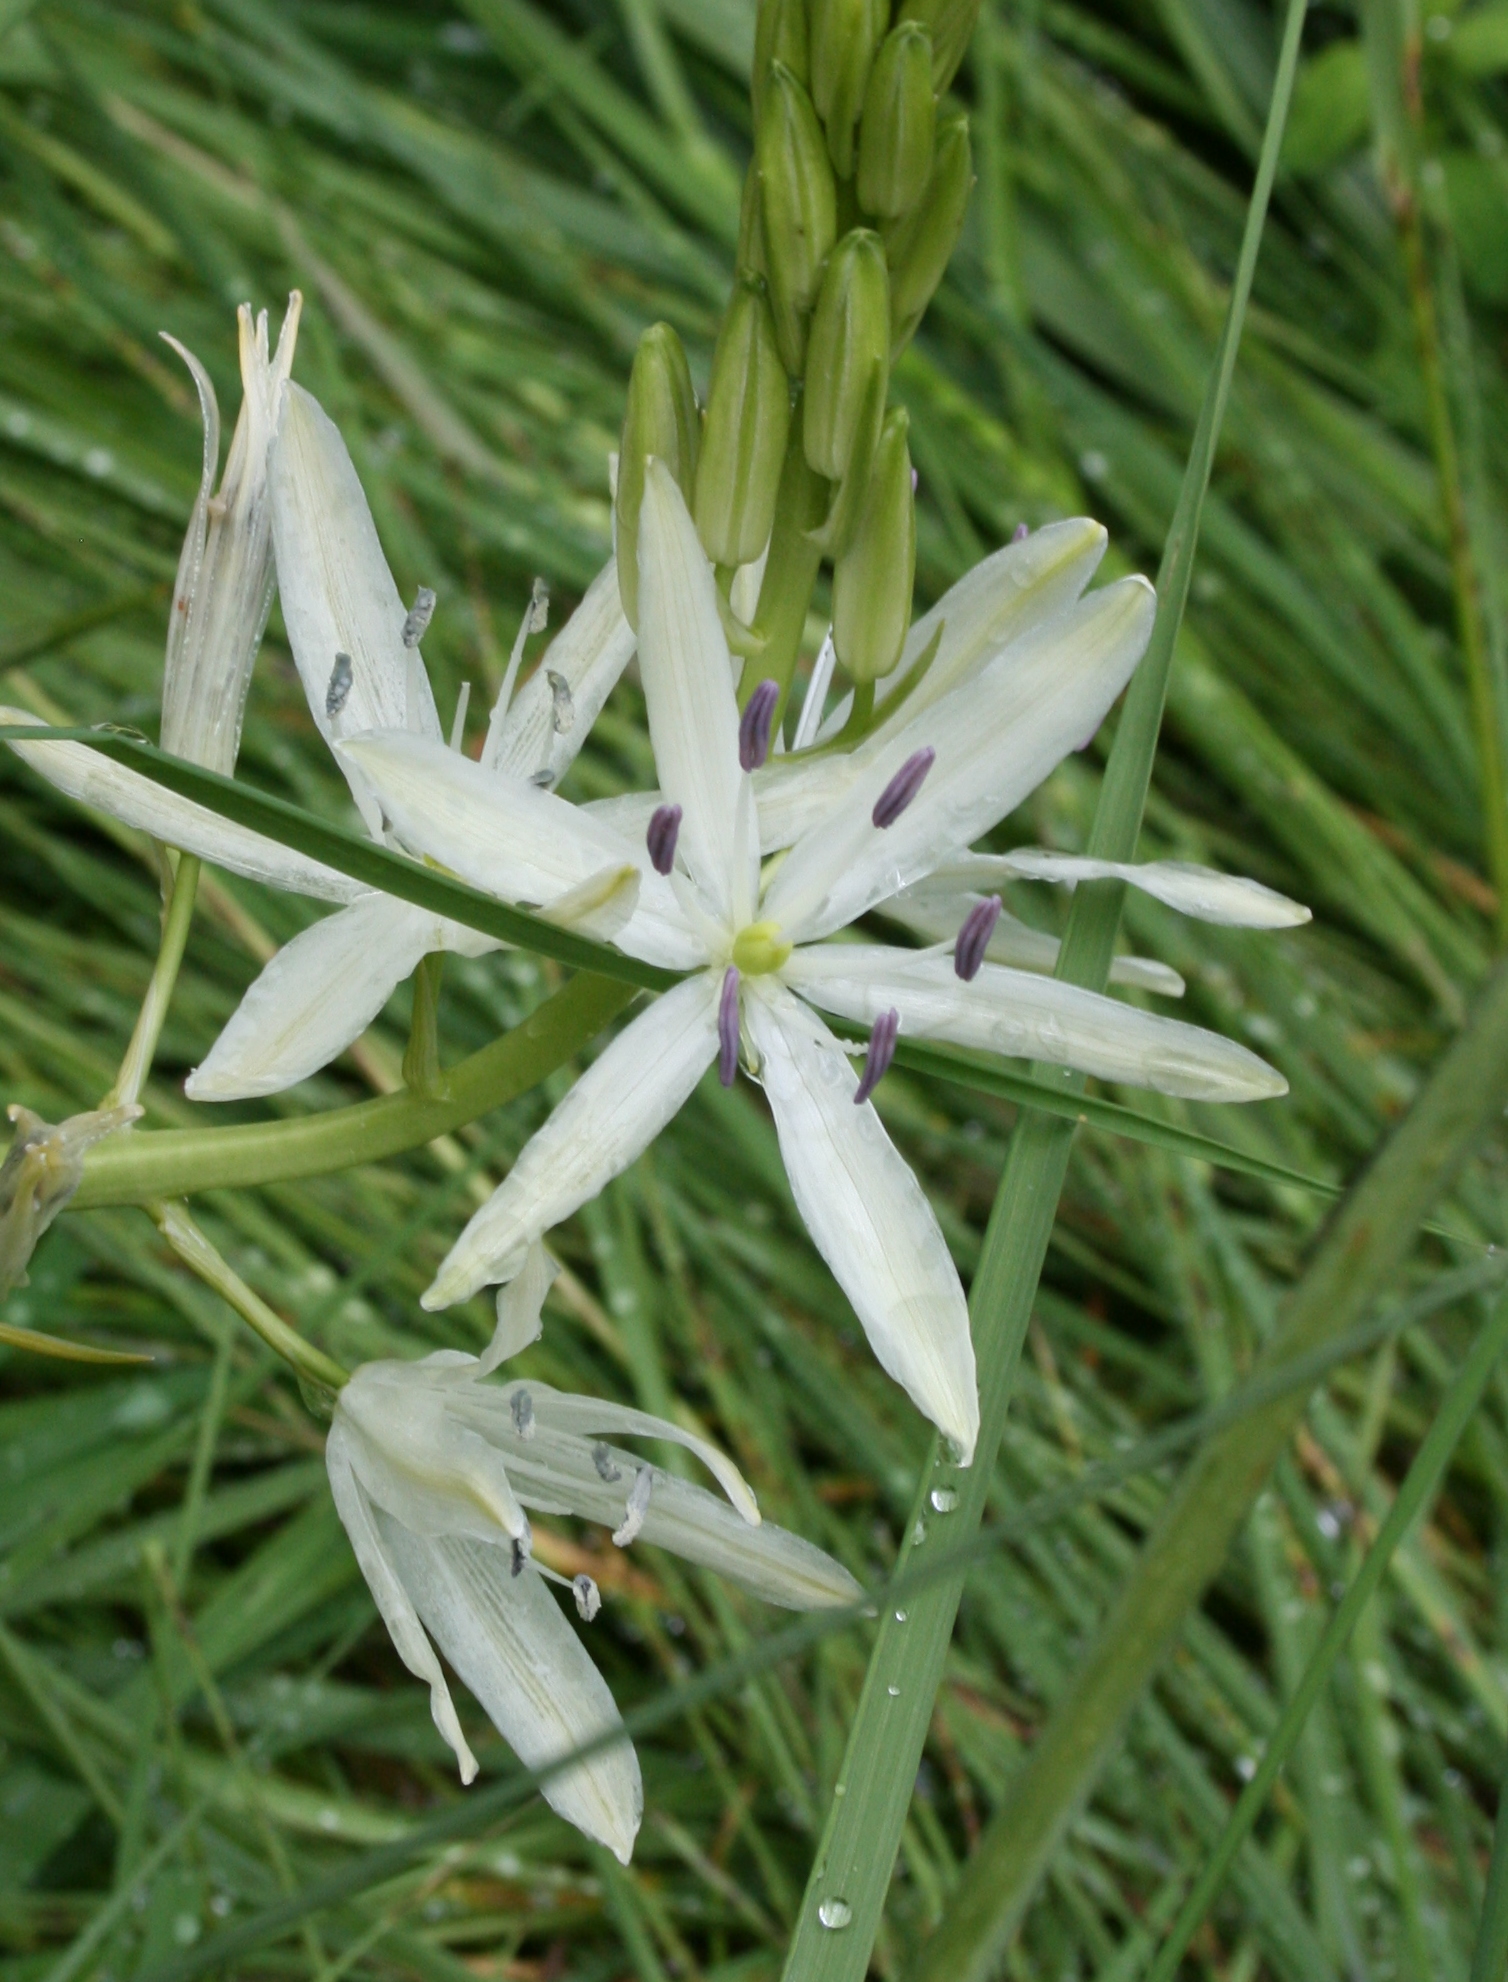 a white flower on a stalk with green leaves